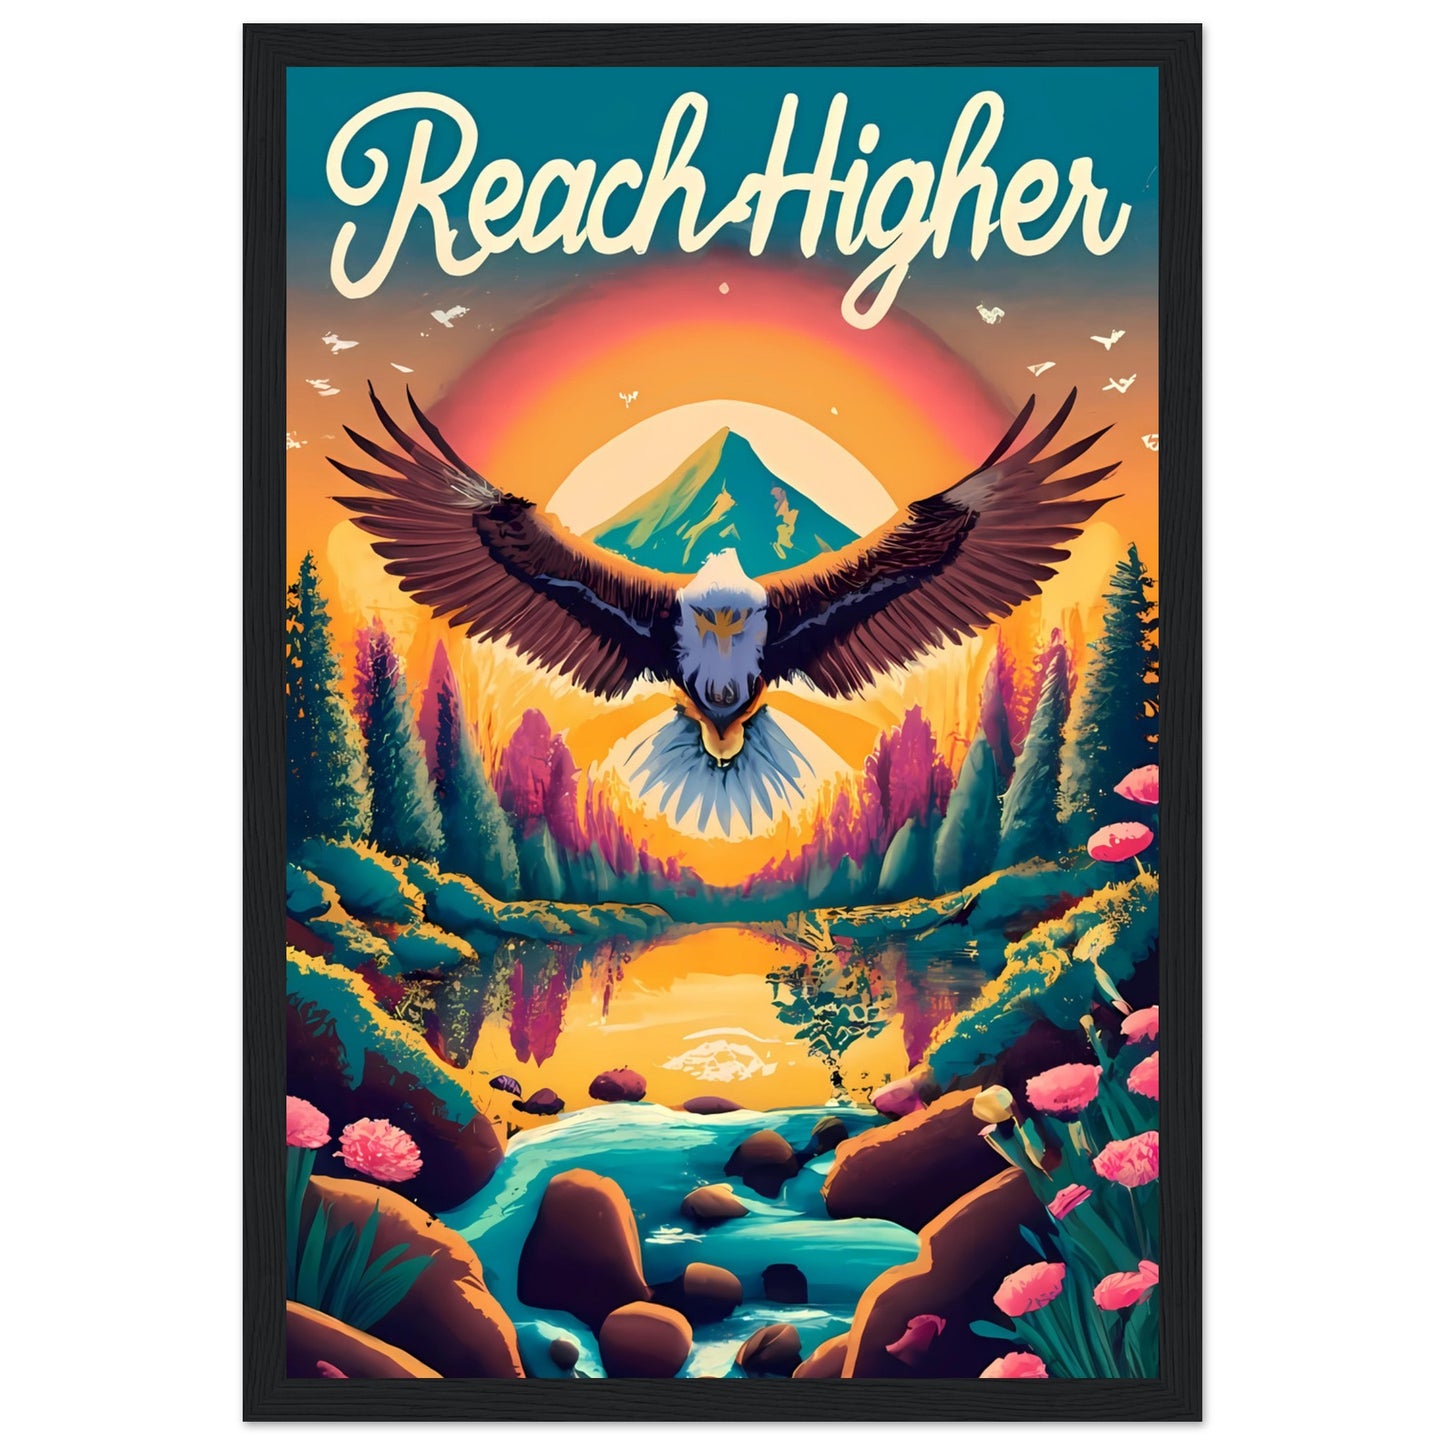 Reach Higher Retro Style Framed Poster with Isaiah 40:31, Eagle Flying, Sunset